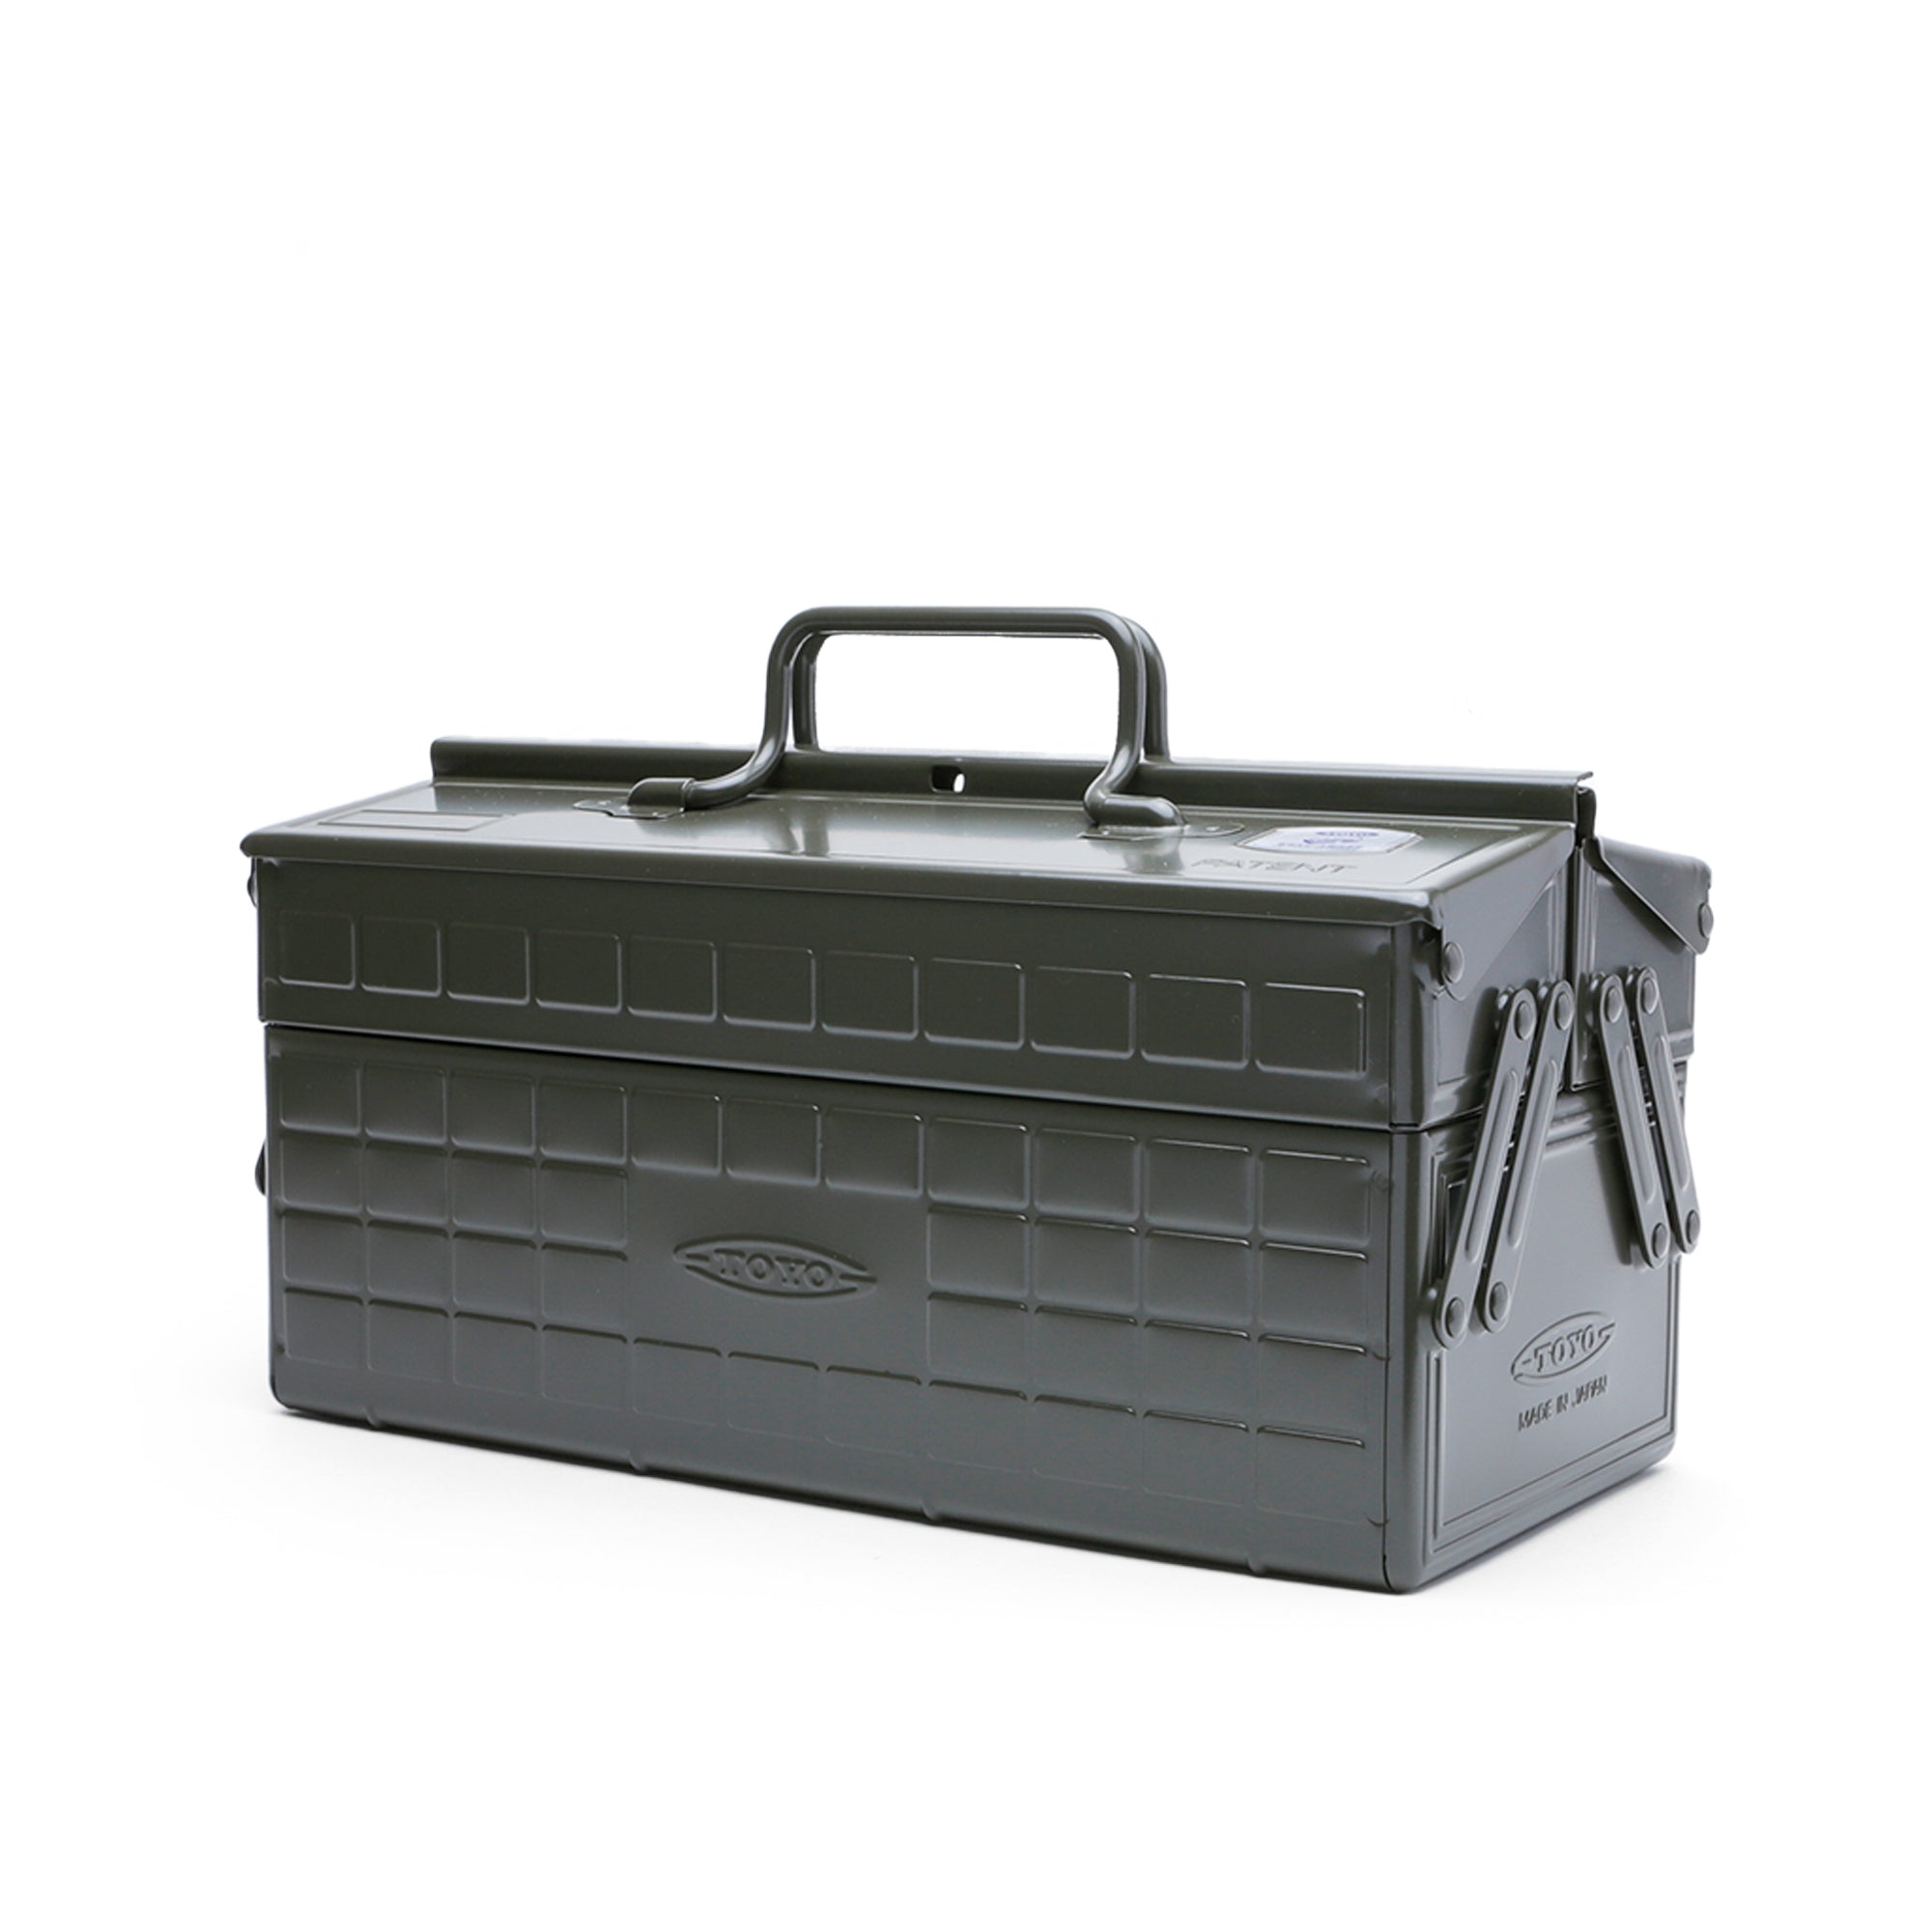 Military Green Toyo Steel Toolbox | Cantilever Lid | Upper Storage Trays, Style ST-350